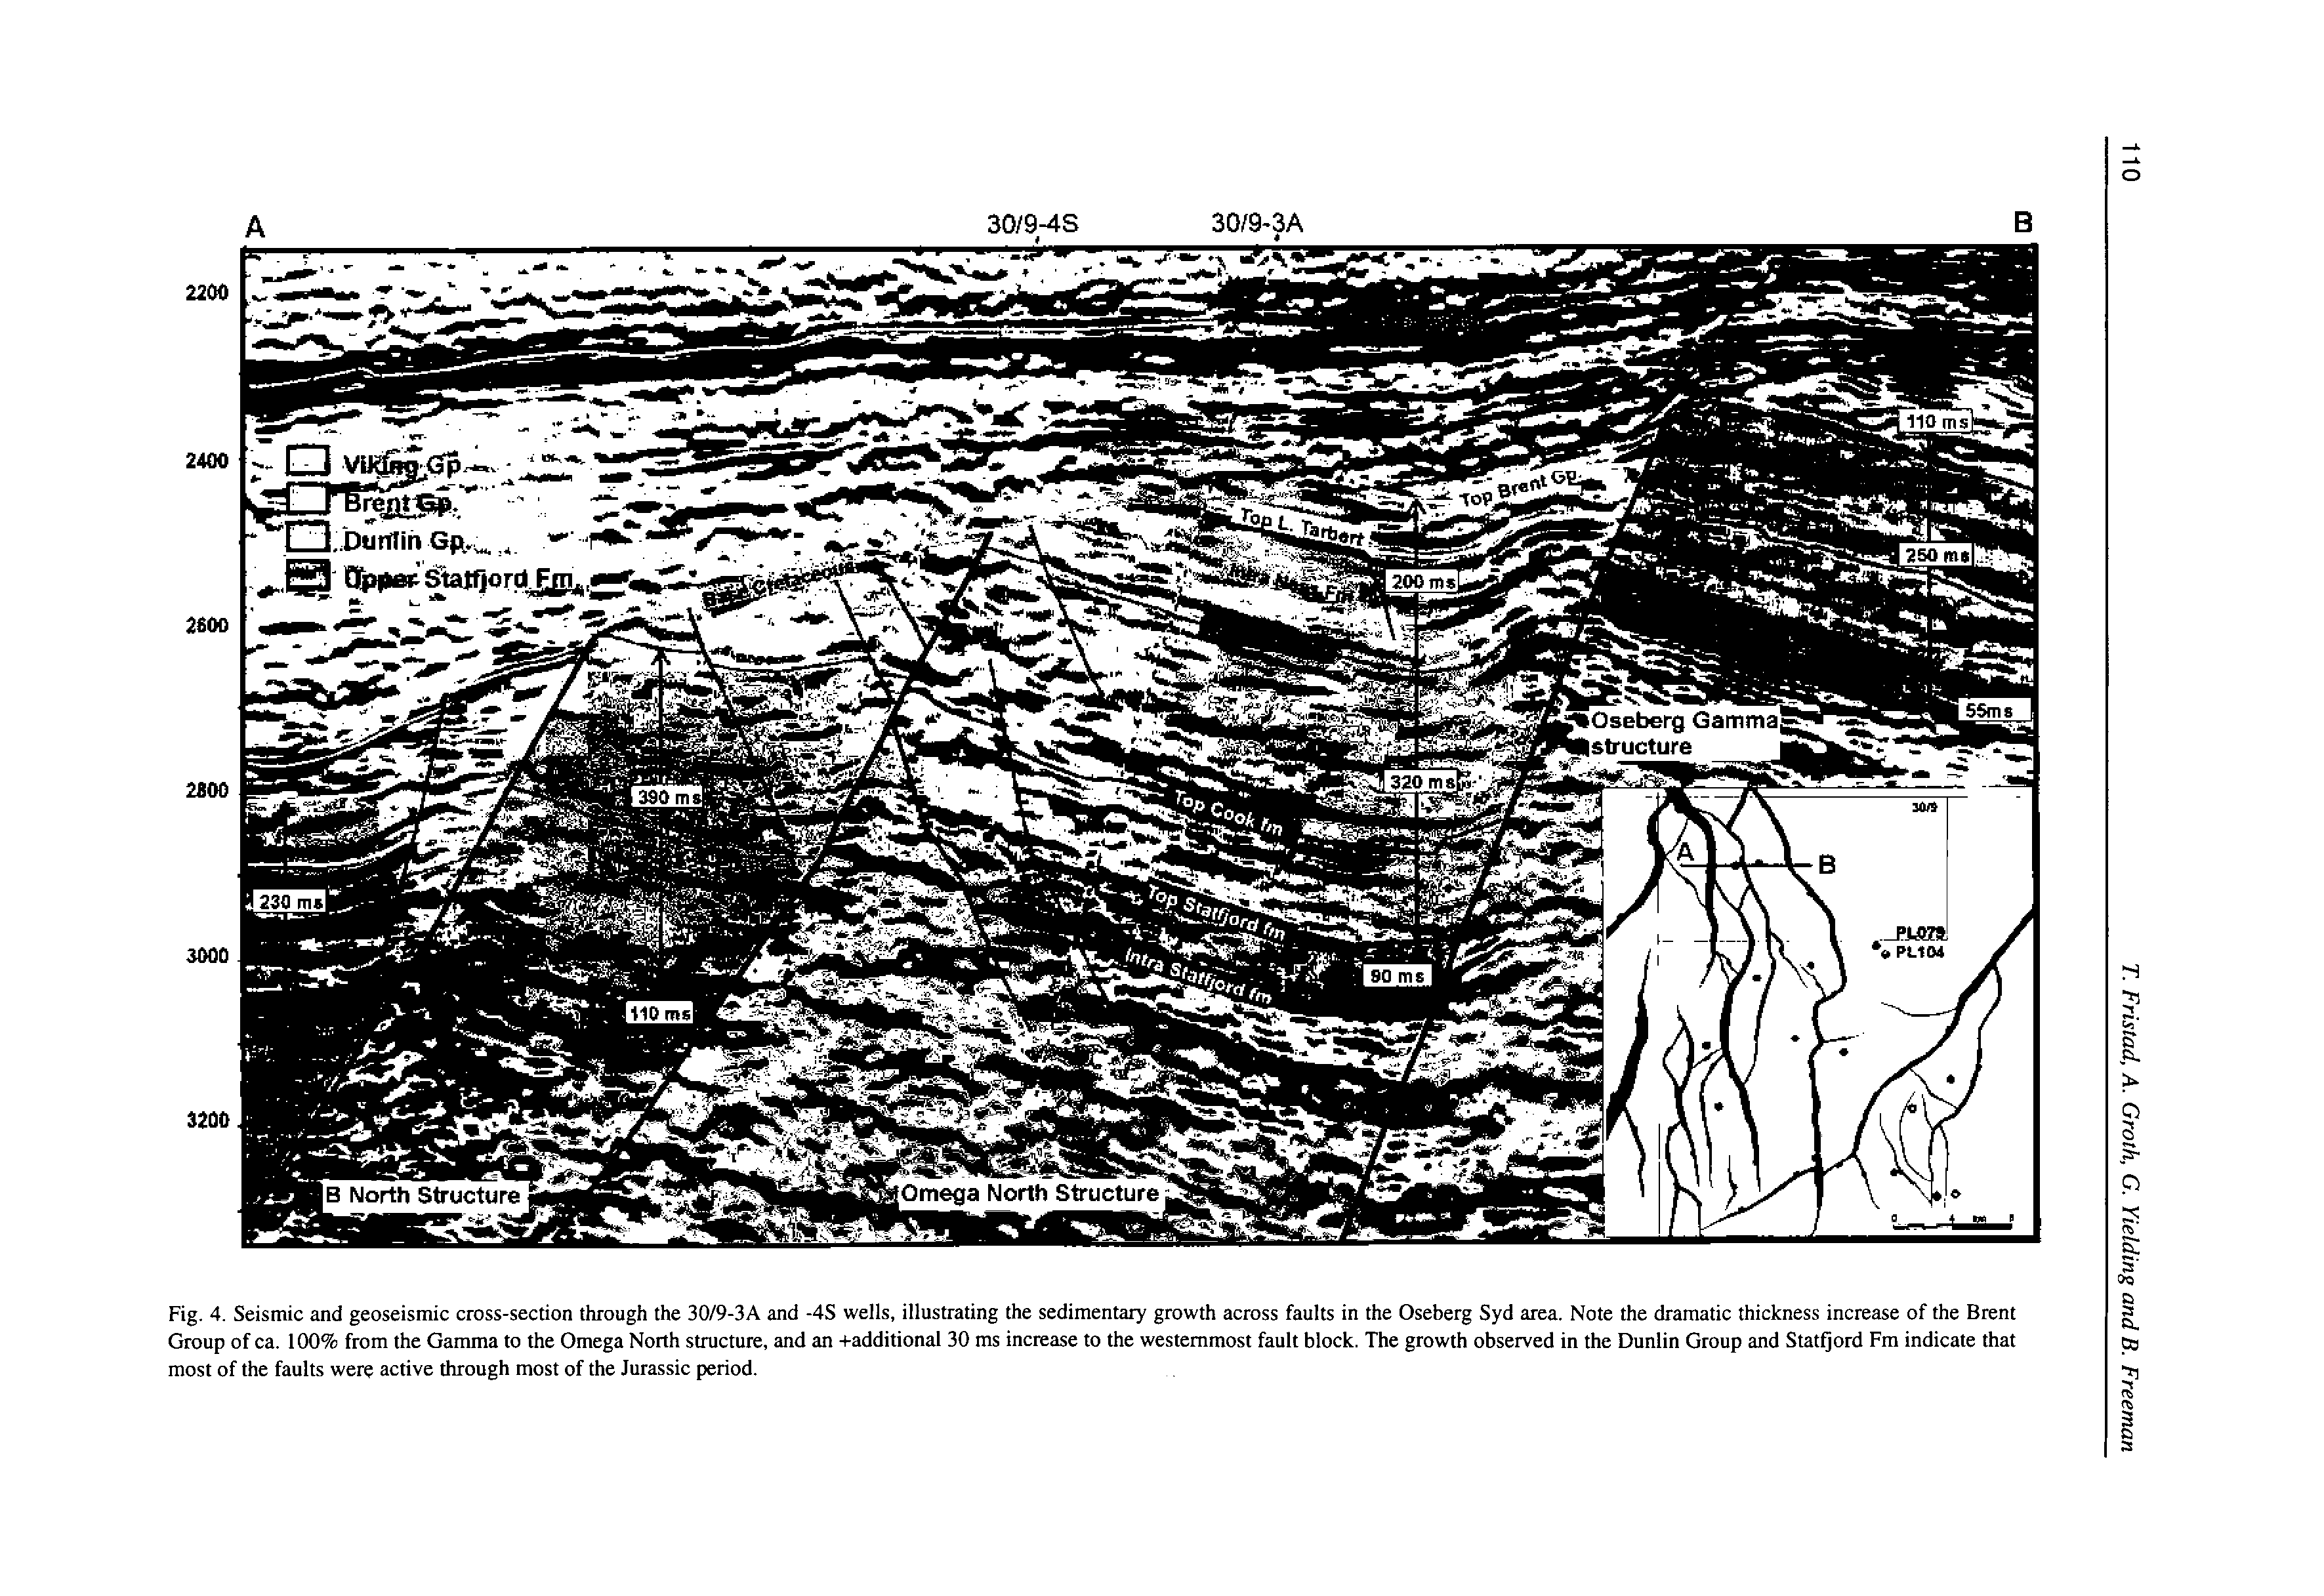 Fig. 4. Seismic and geoseismic cross-section through the 30/9-3A and -4S wells, illustrating the sedimentary growth across faults in the Oseberg Syd area. Note the dramatic thickness increase of the Brent Group of ca. 100% from the Gamma to the Omega North structure, and an -i-additional 30 ms increase to the westernmost fault block. The growth observed in the Dunlin Group and StatQord Fm indicate that most of the faults were active through most of the Jurassic period.